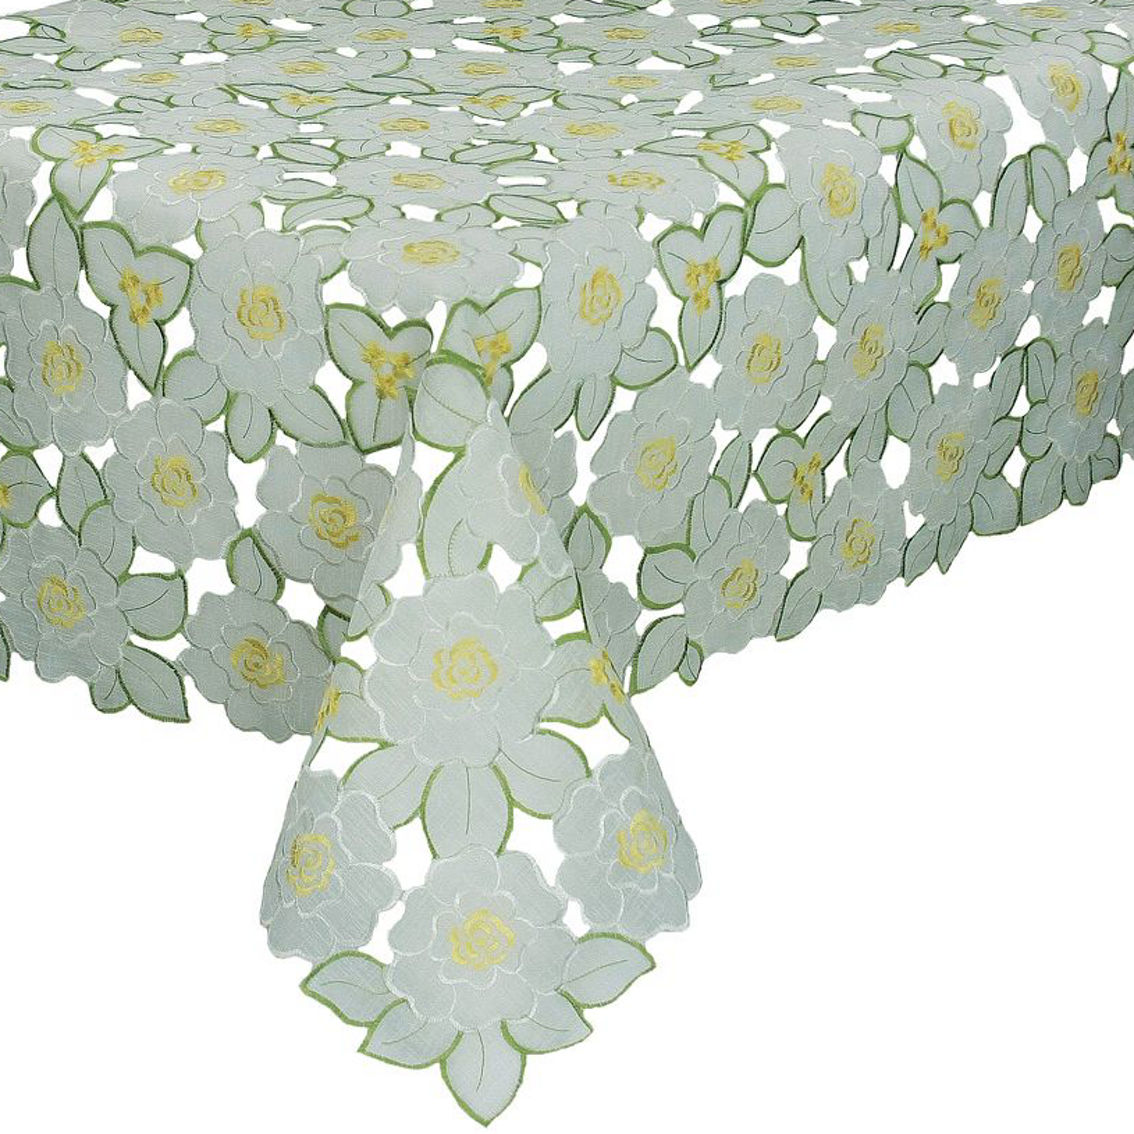 Xia Home Fashions, Dainty Flowers 70-Inch By 70-Inch Tablecloth - Image 2 of 2